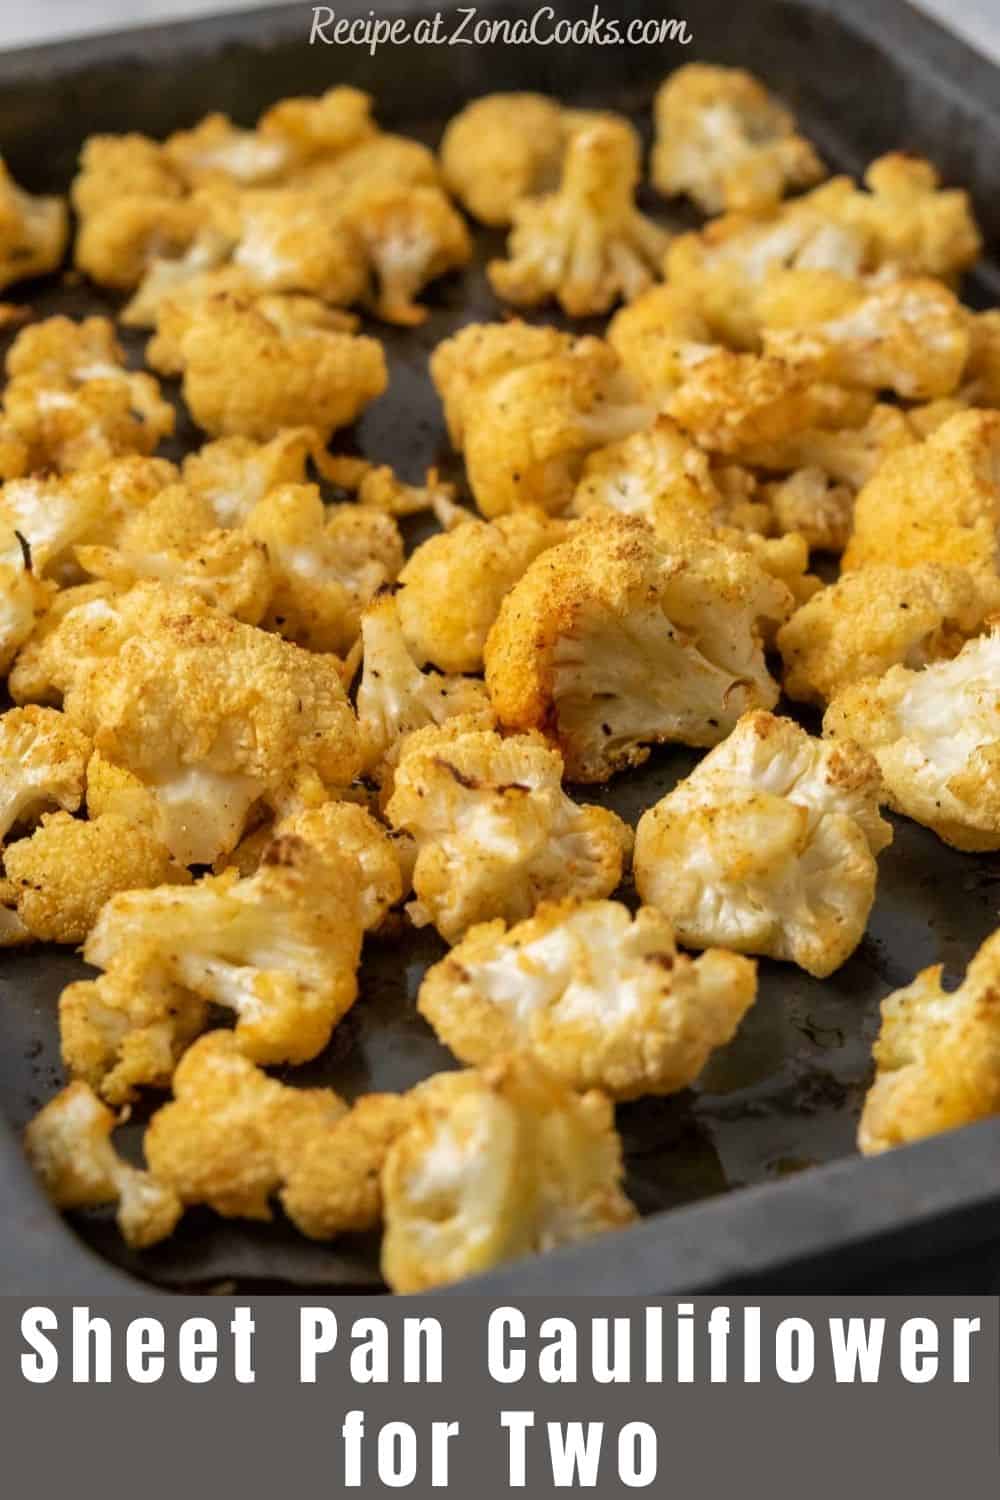 a small baking sheet pan filled with golden brown oven baked cauliflower florets and text reading recipe at zonacooks.com sheet pan cauliflower for two